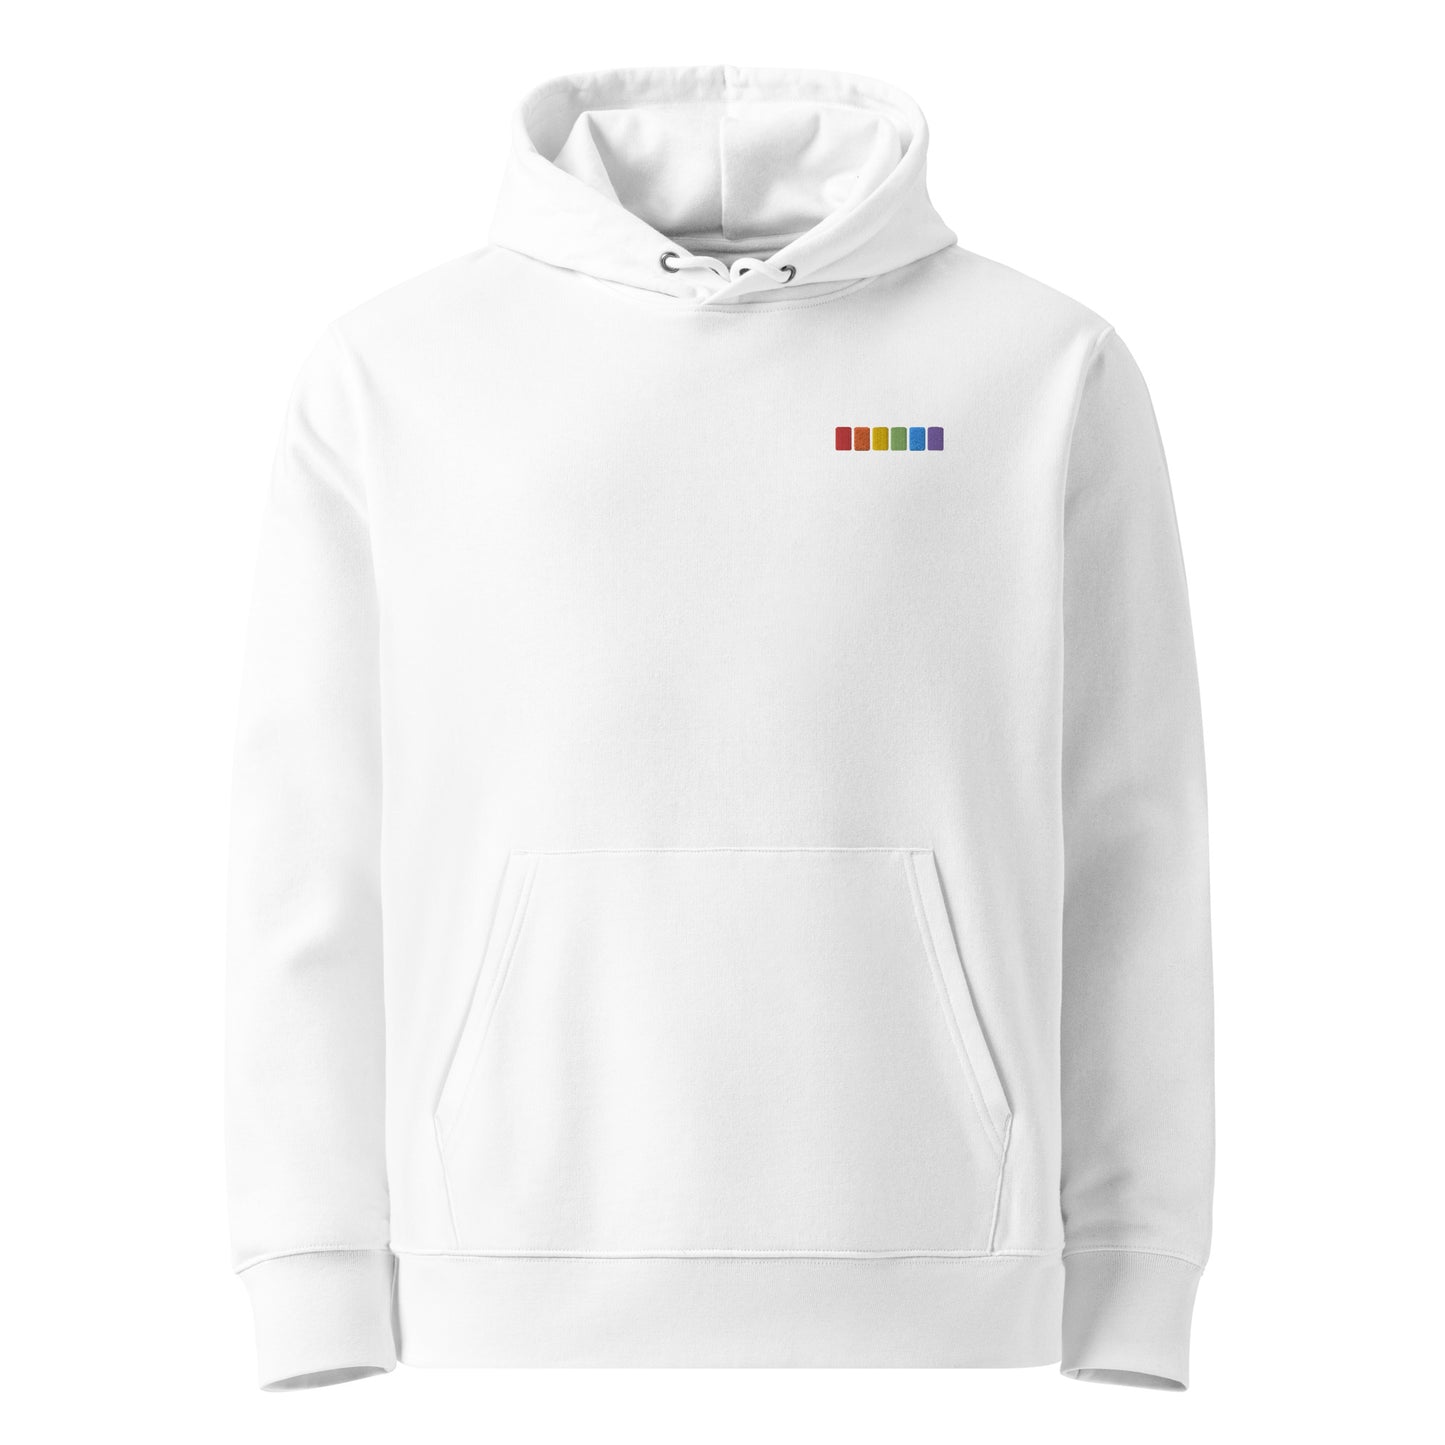 Unisex eco-friendly white hoodie featuring on the upper left chest rainbow squares embroidery, adding a touch of lgbtq to your outfit. sizes: small, medium, large, extra large, double extra large.